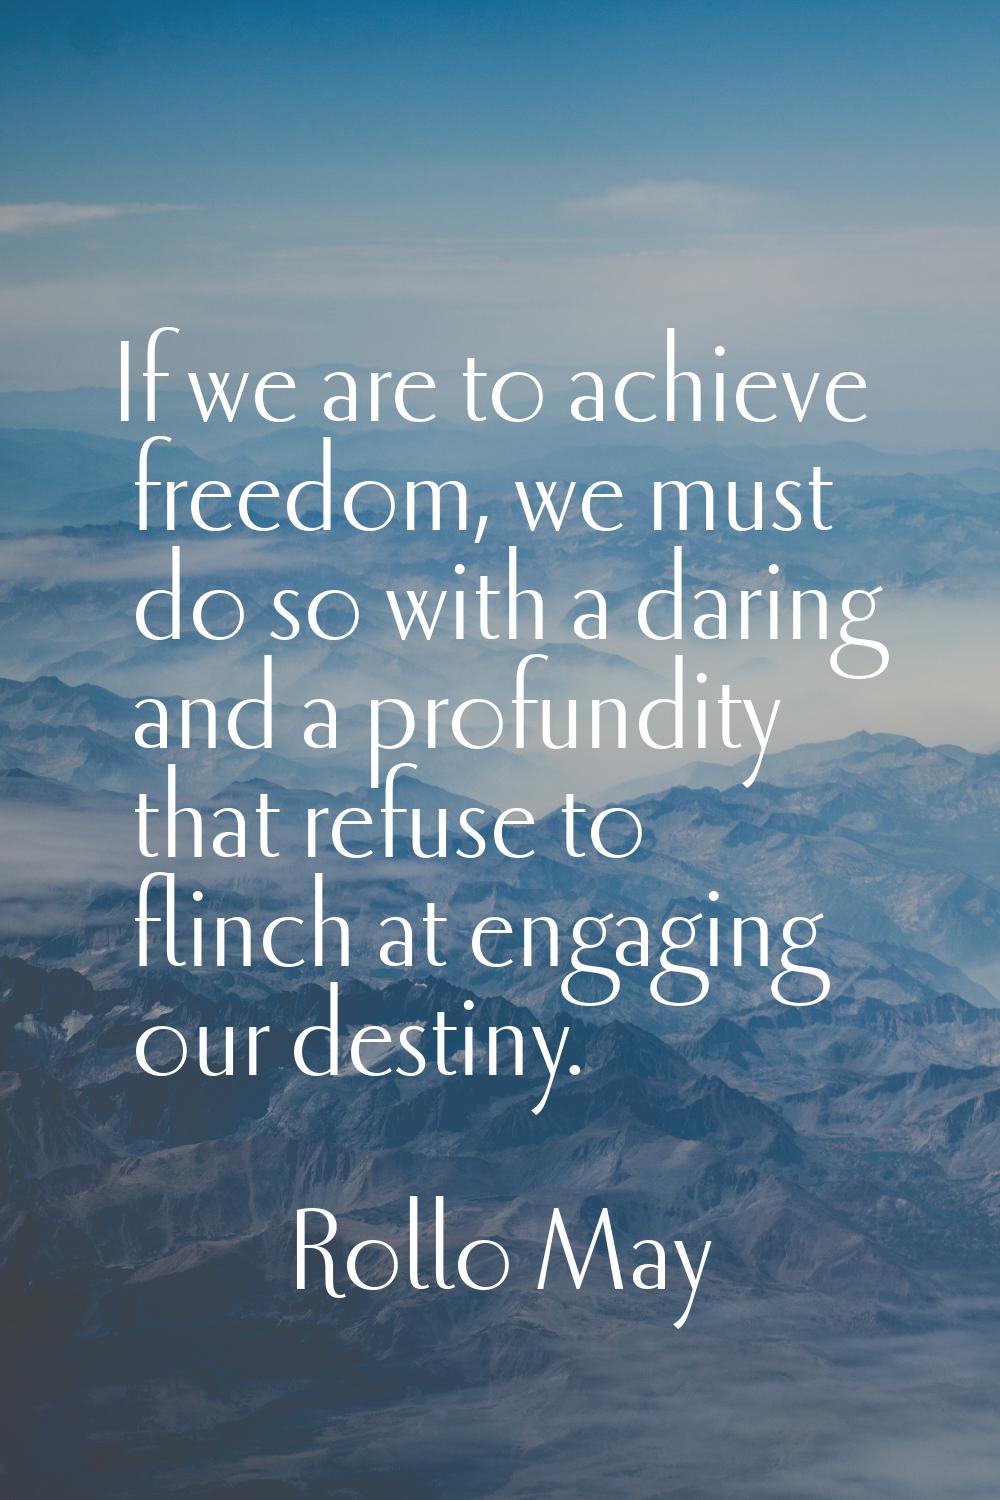 If we are to achieve freedom, we must do so with a daring and a profundity that refuse to flinch at